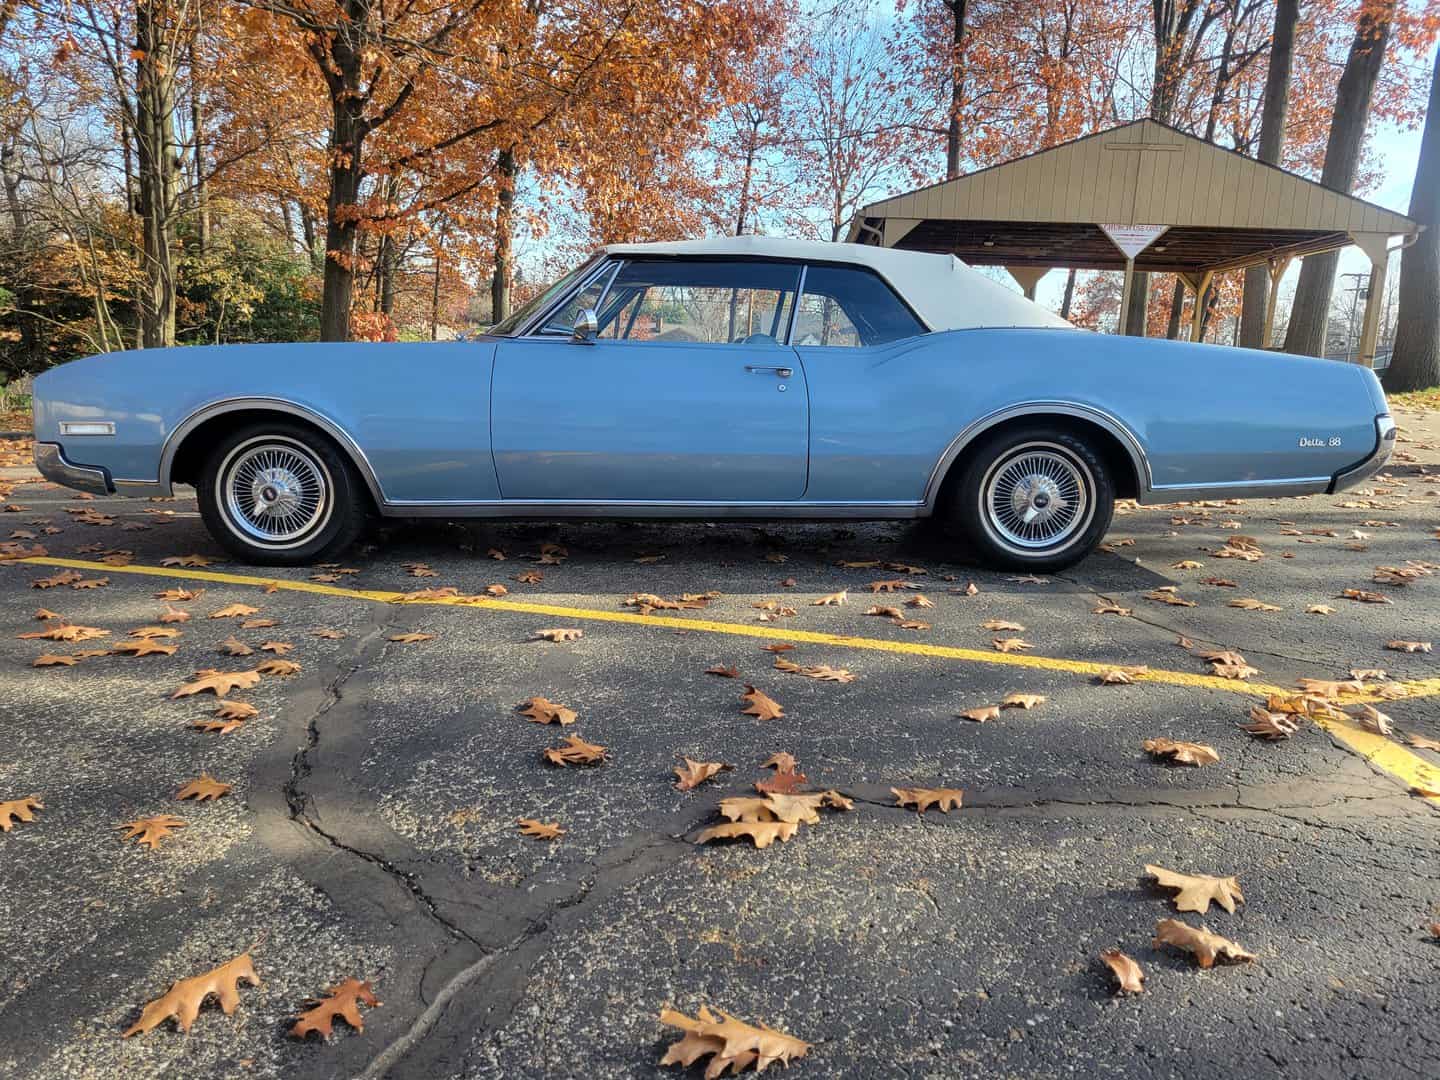 A 1967 Oldsmobile, An Old Blue Car, Parked In A Parking Lot.